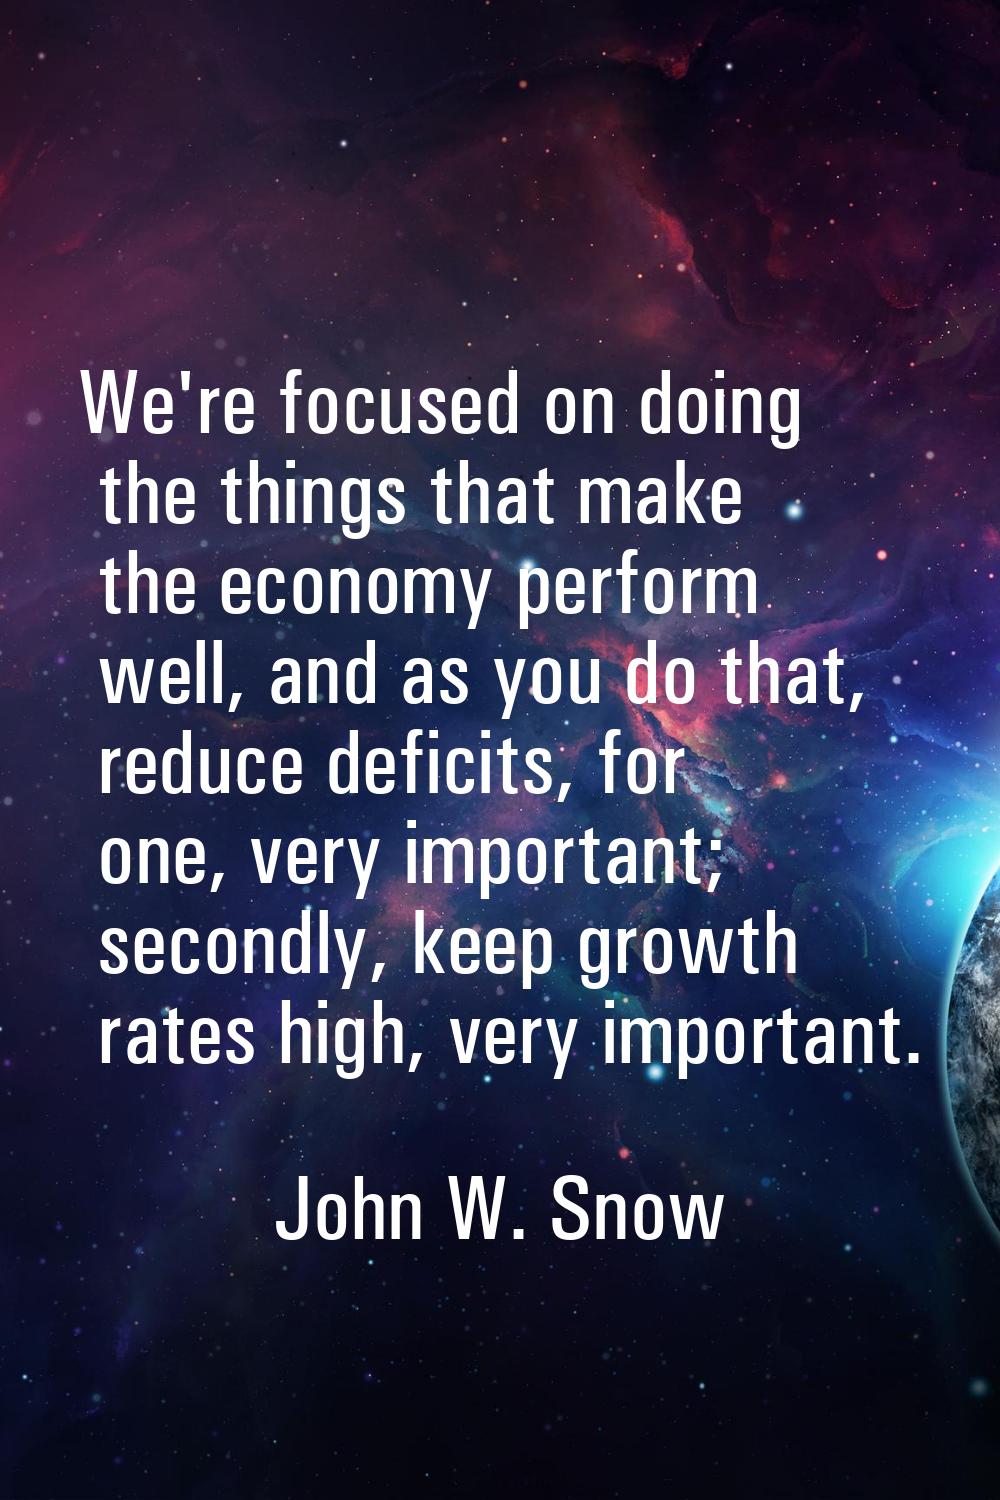 We're focused on doing the things that make the economy perform well, and as you do that, reduce de